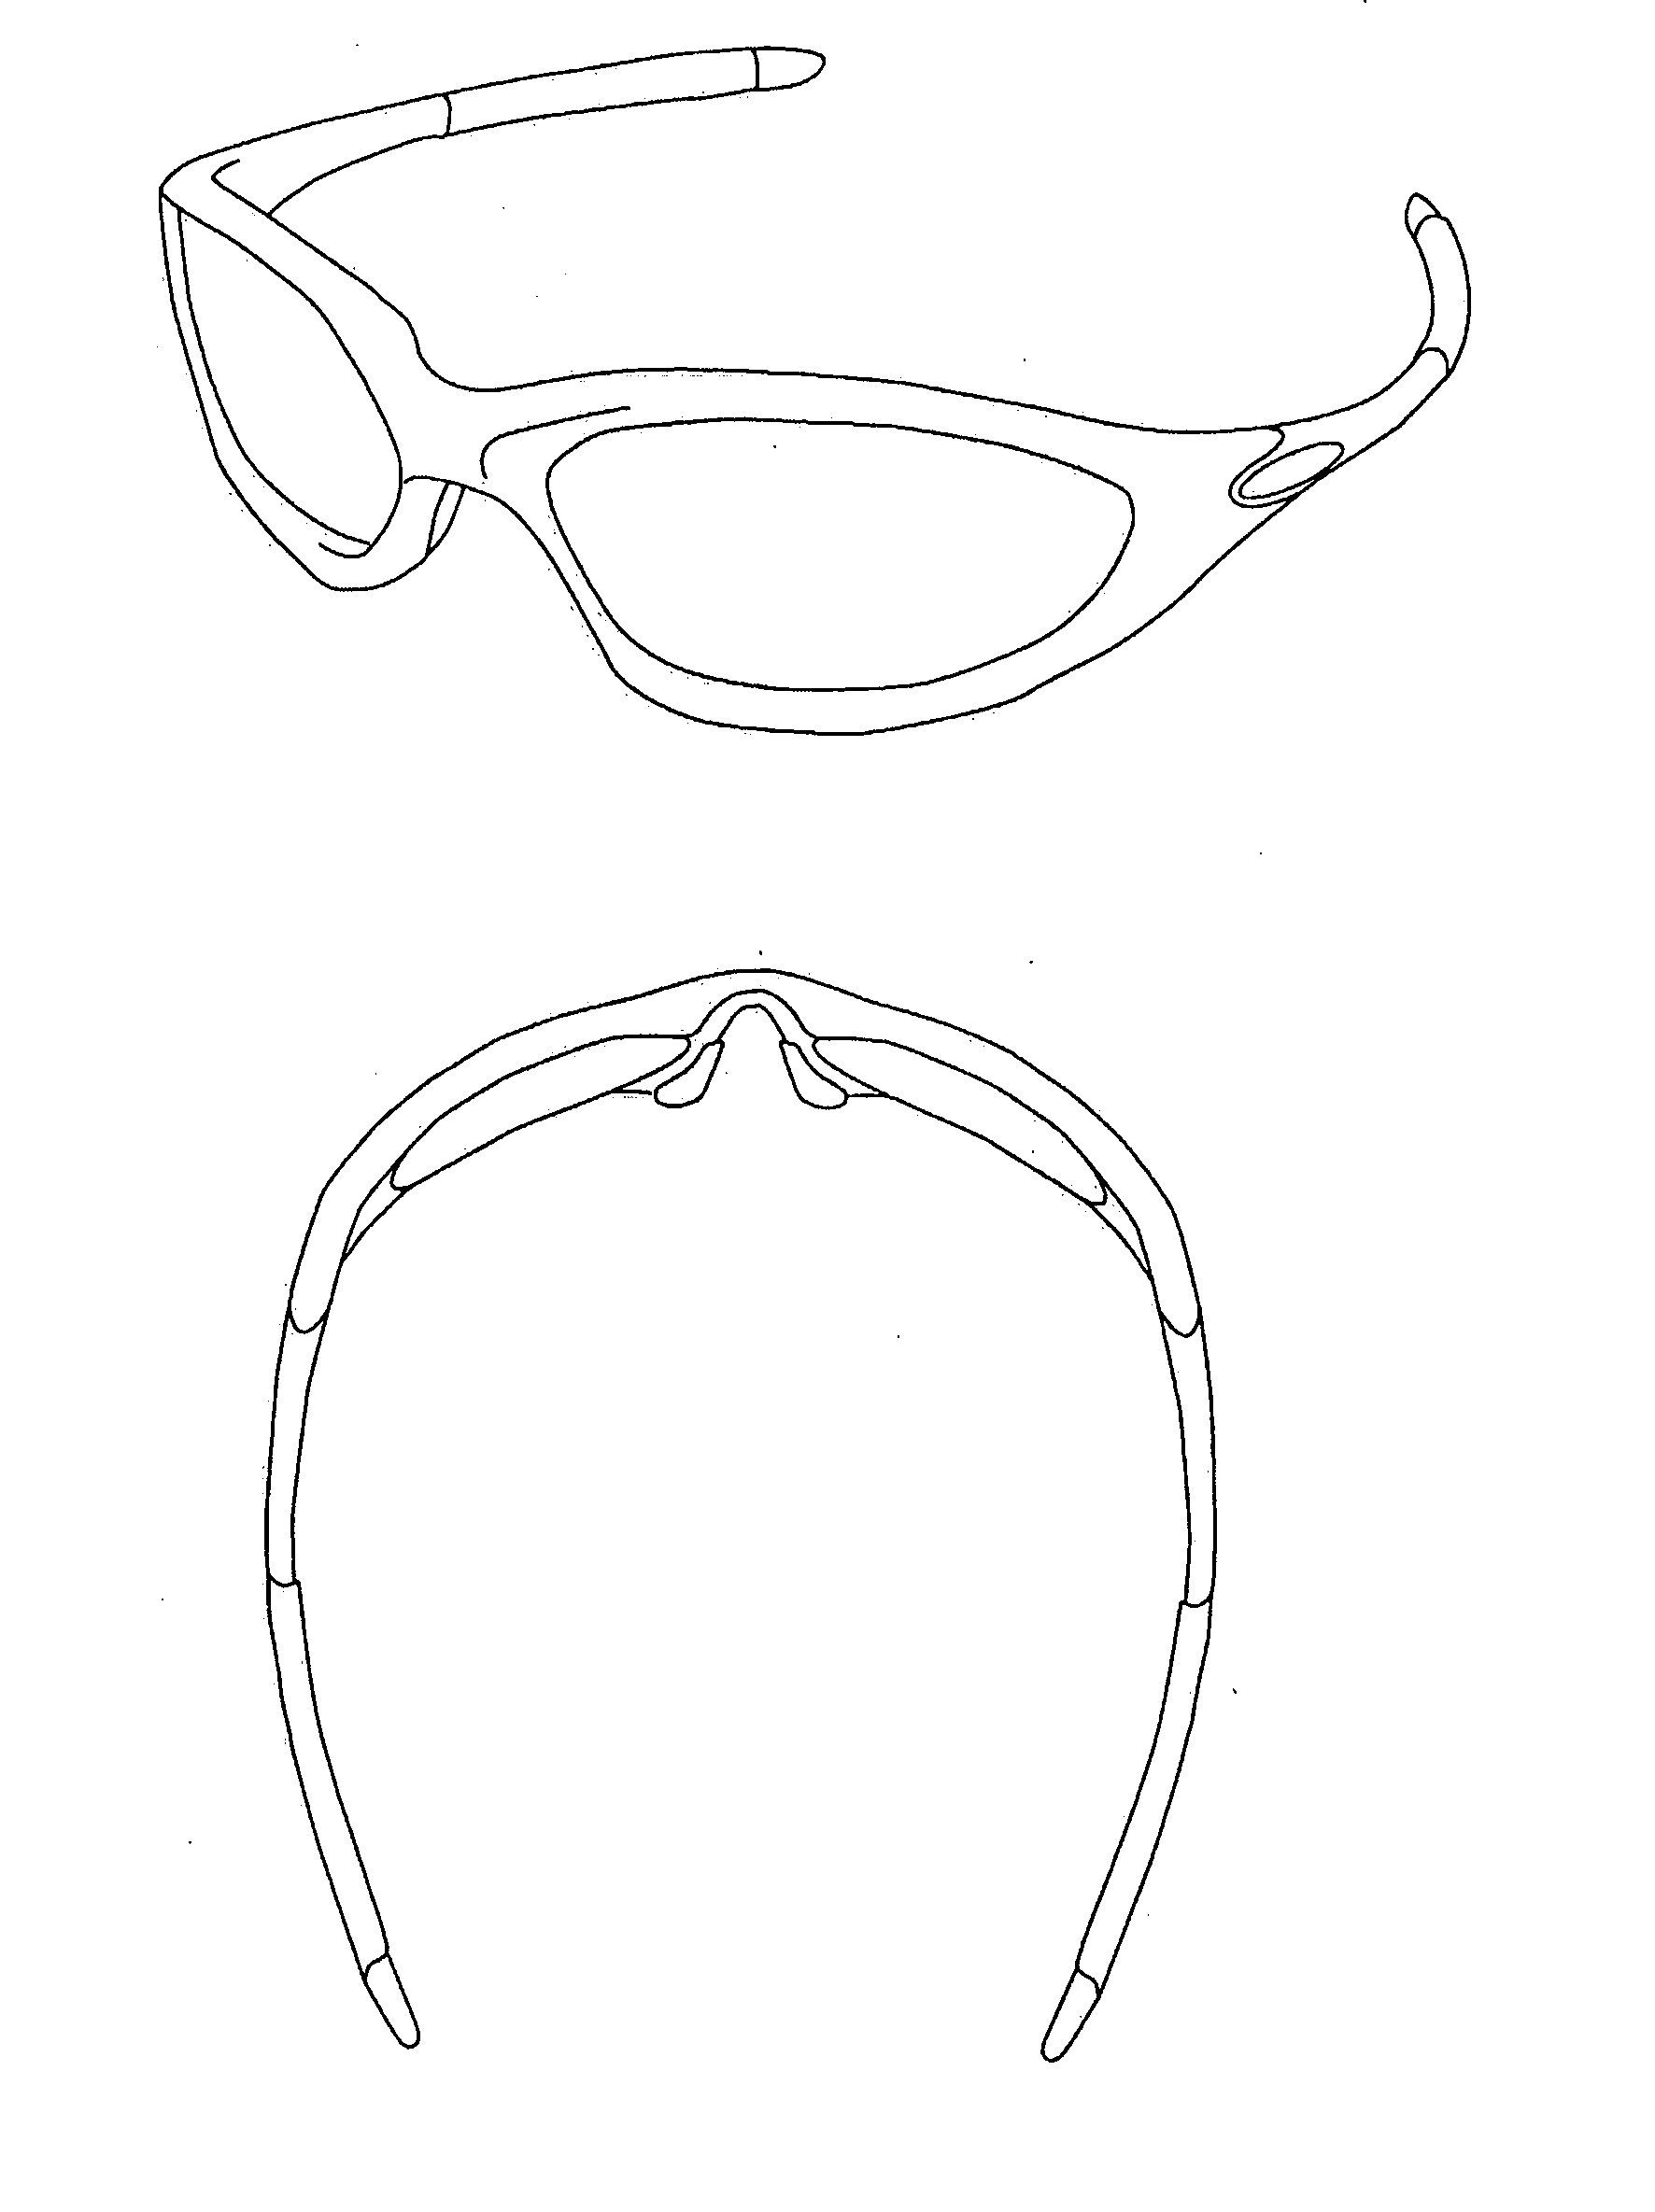 Method for designing spectacle lens, spectacle lens, and spectacles